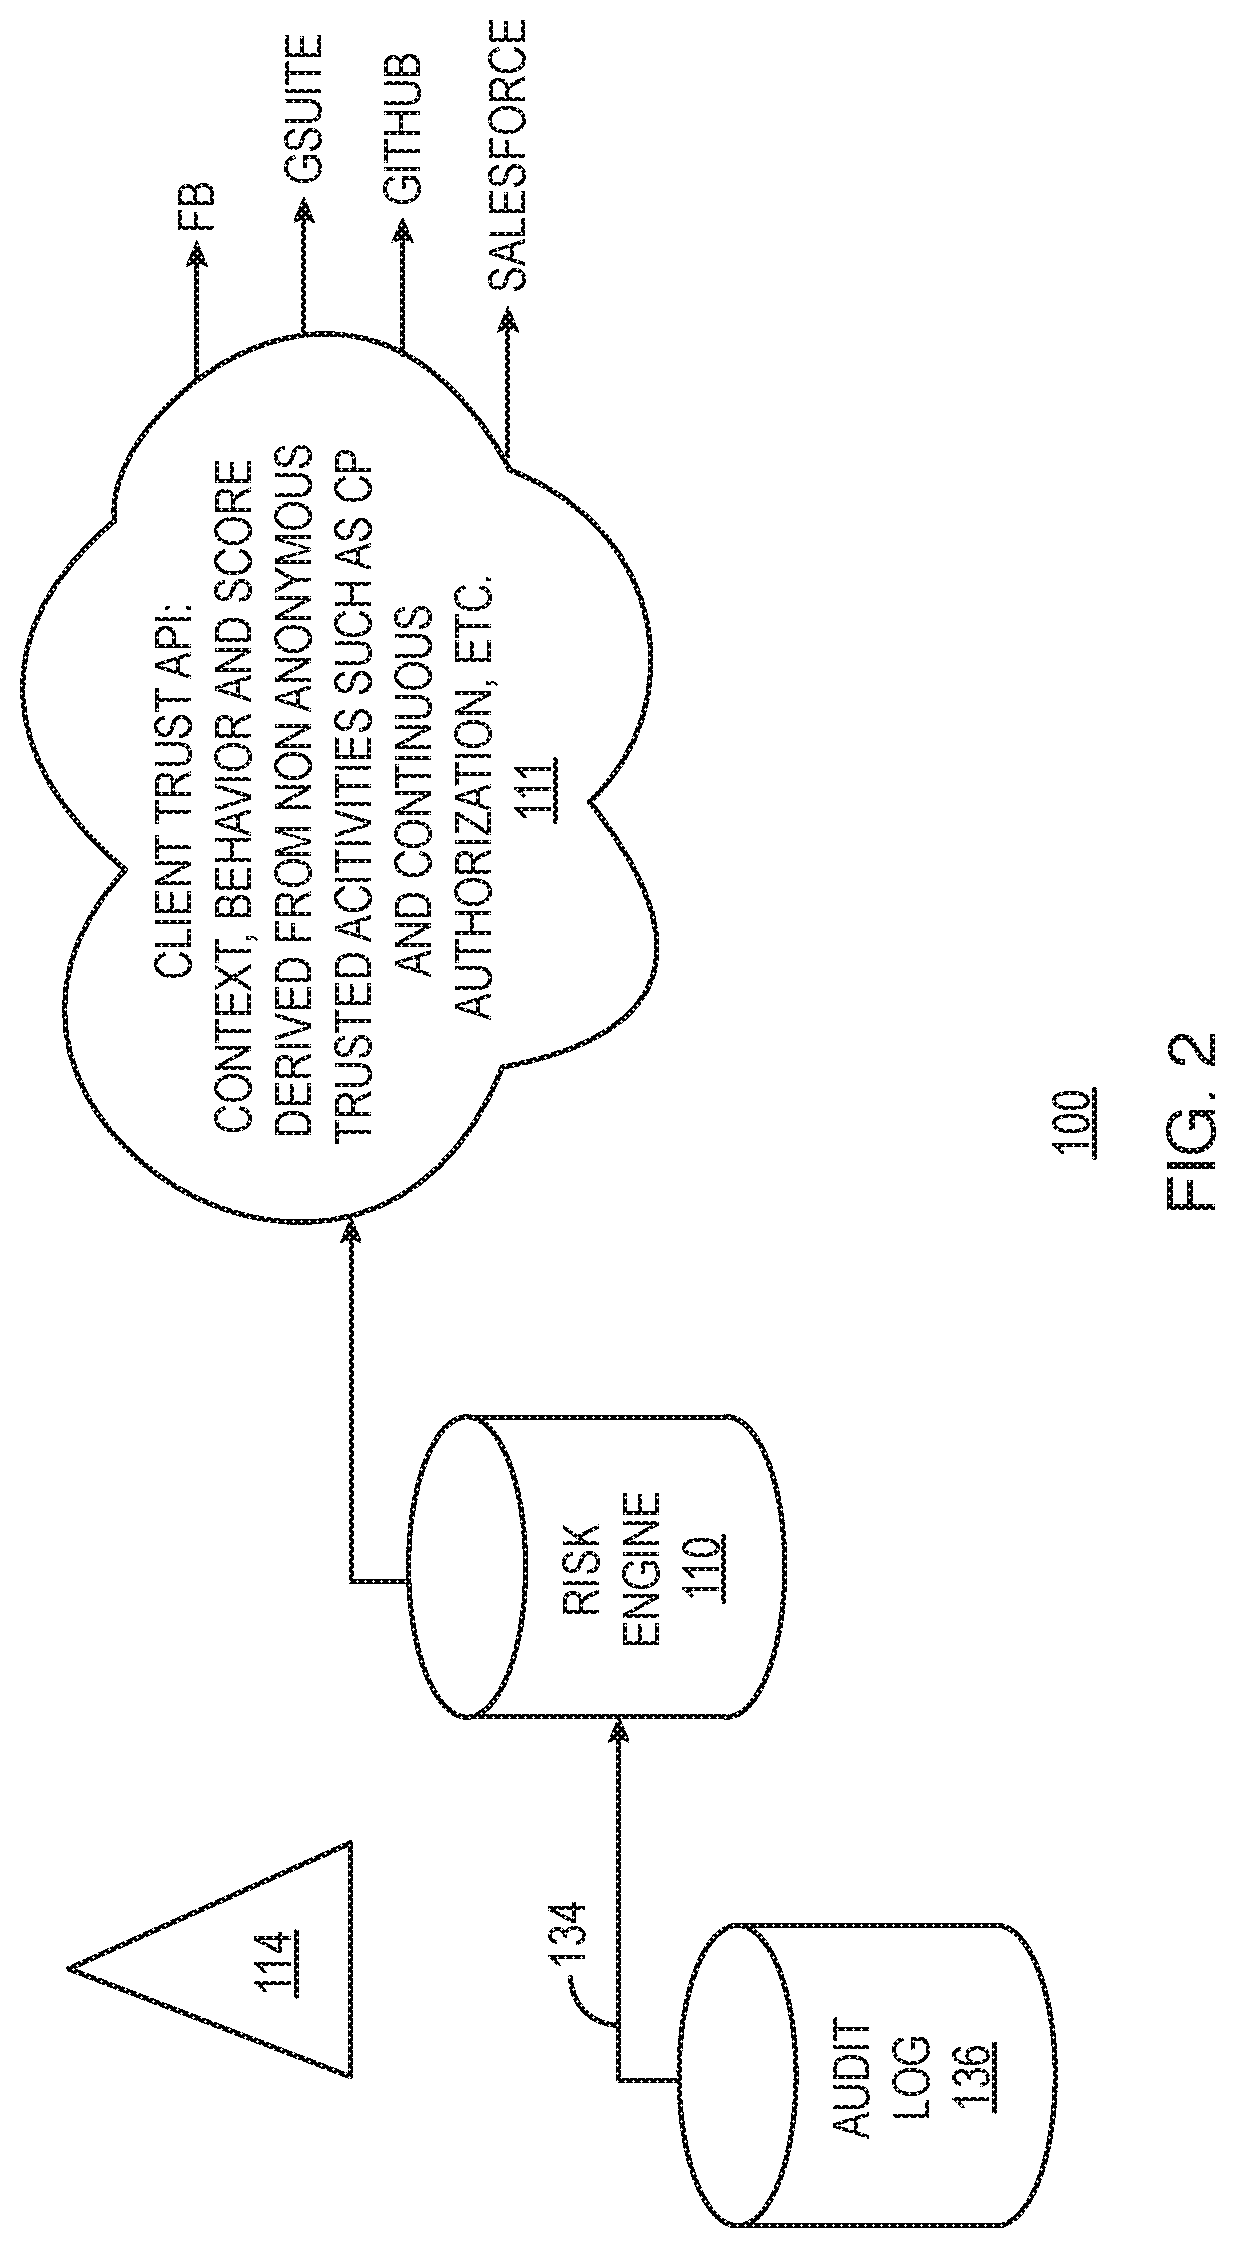 System and method for continuous passwordless authentication across trusted devices